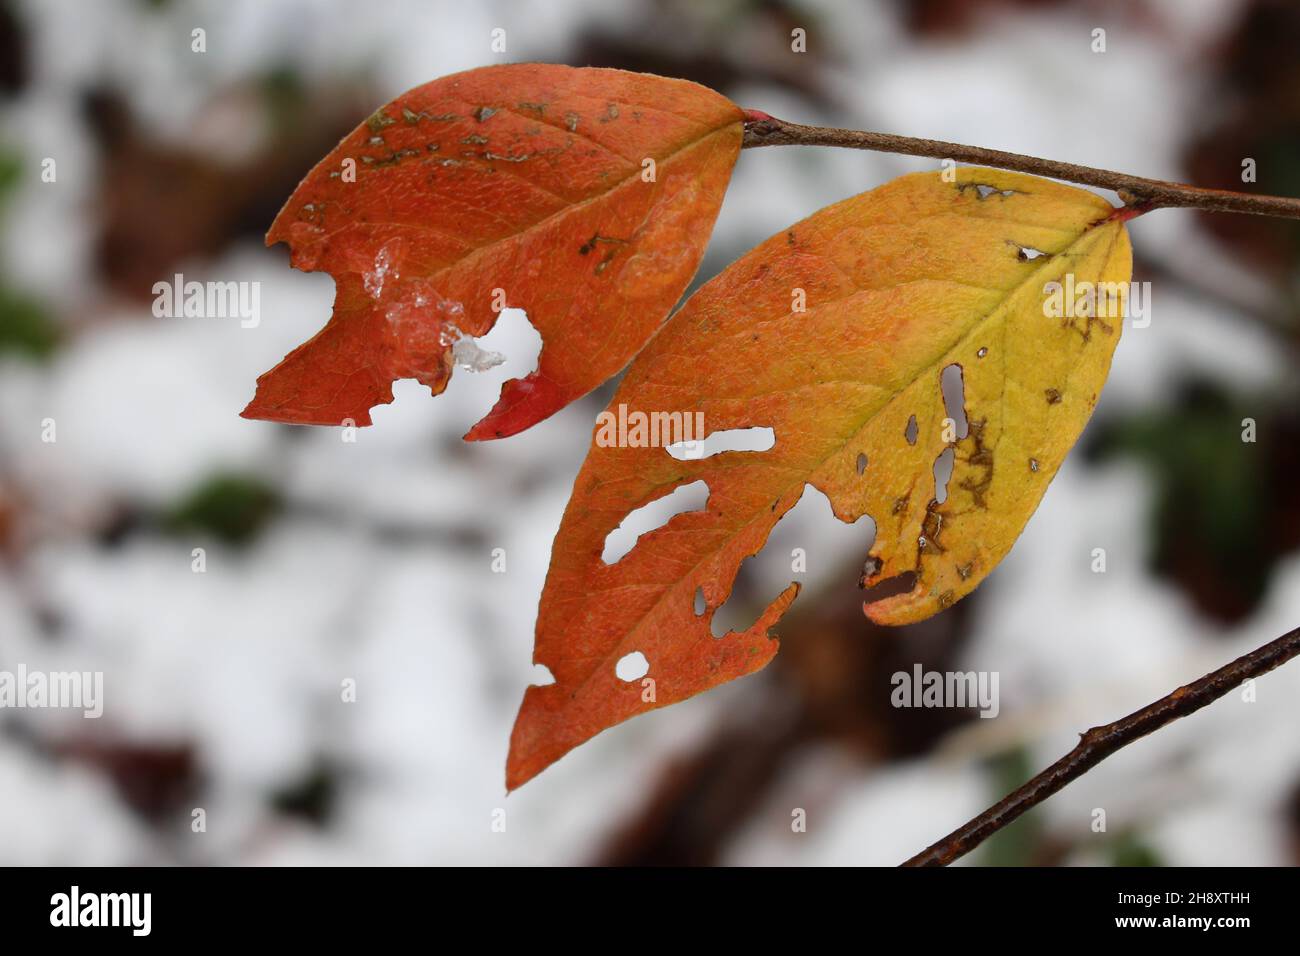 Close-up of warmly coloured, tattered, autumn leaves still on the branch with a blurred snowy background (Uetliberg, Zurich) Stock Photo